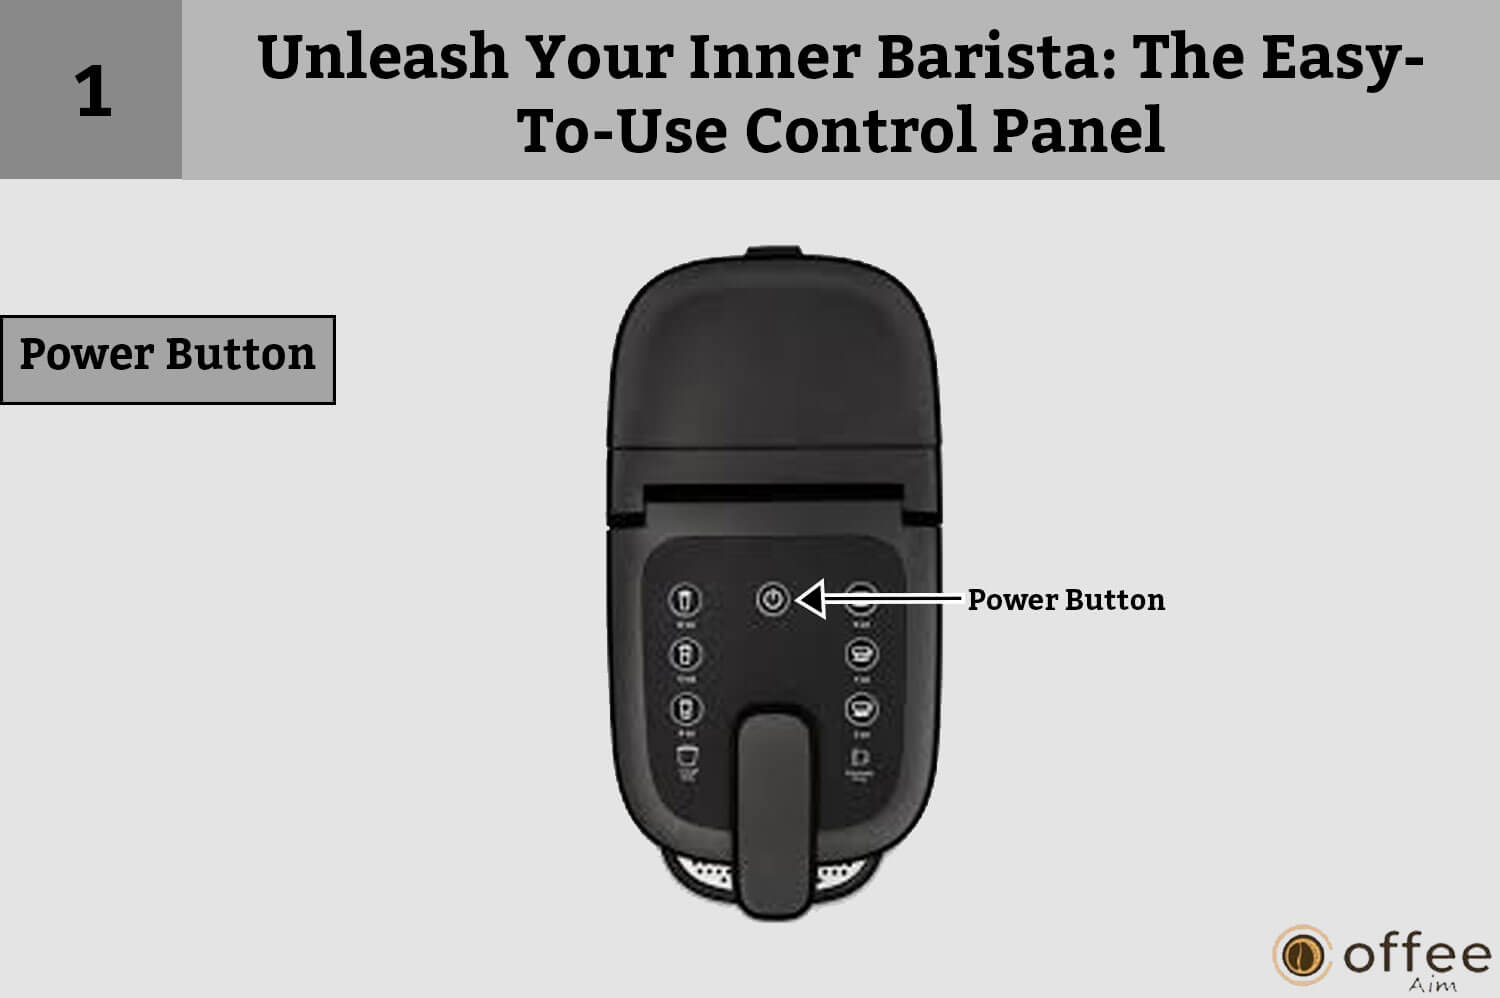 This image depicts the "Power Button" as part of the "Easy-To-Use Control Panel" in the article explaining how to connect the Nespresso Vertuo Creatista machine.